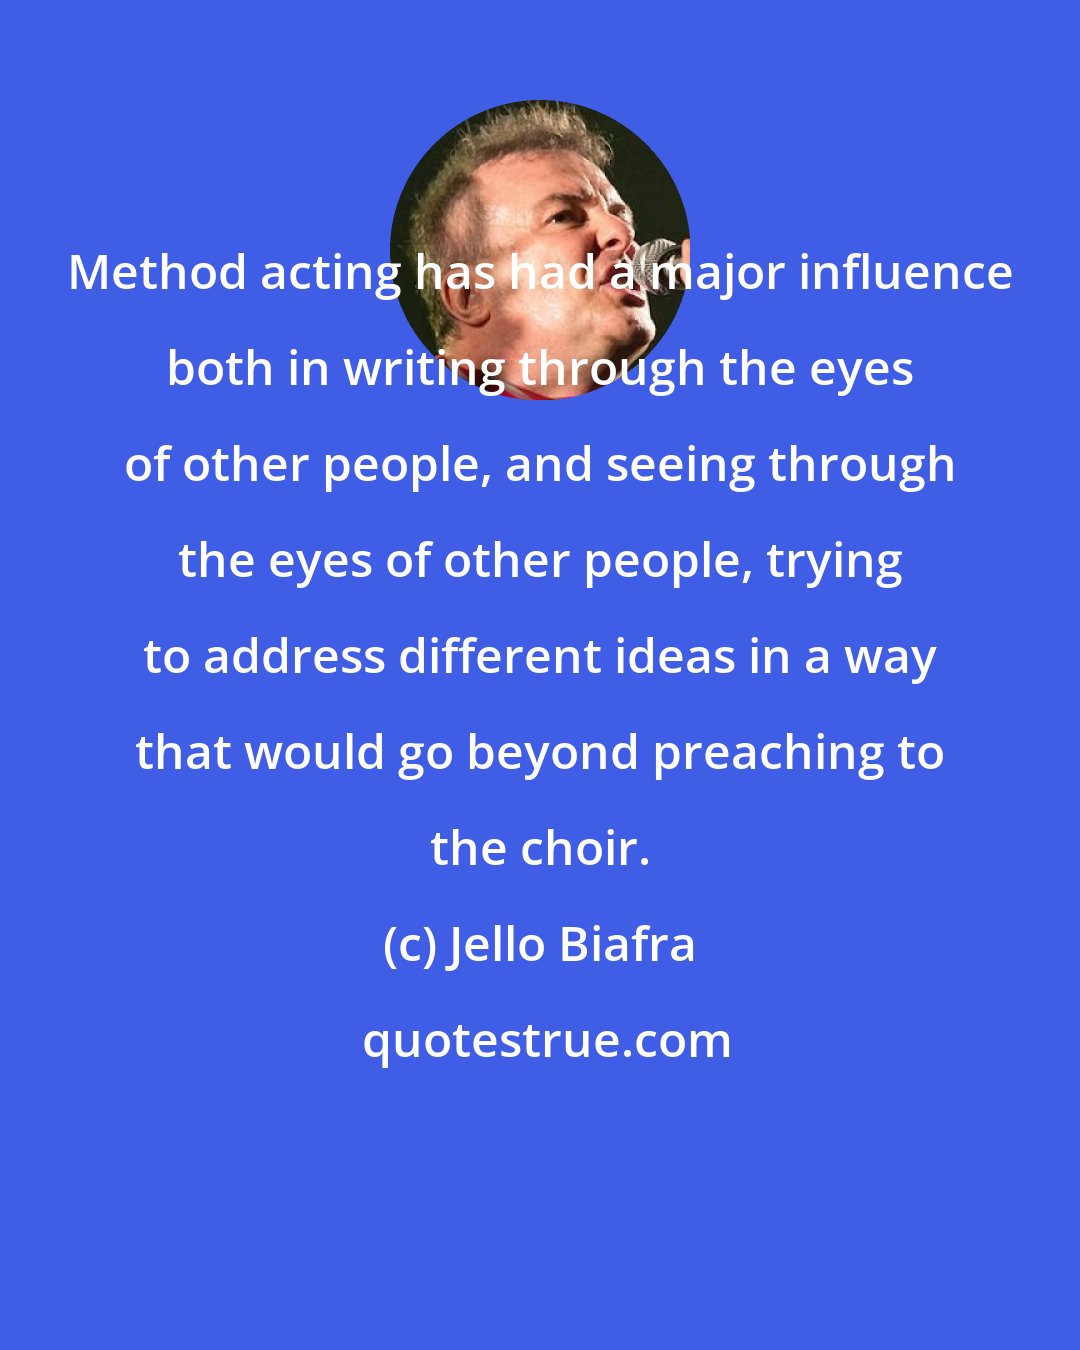 Jello Biafra: Method acting has had a major influence both in writing through the eyes of other people, and seeing through the eyes of other people, trying to address different ideas in a way that would go beyond preaching to the choir.